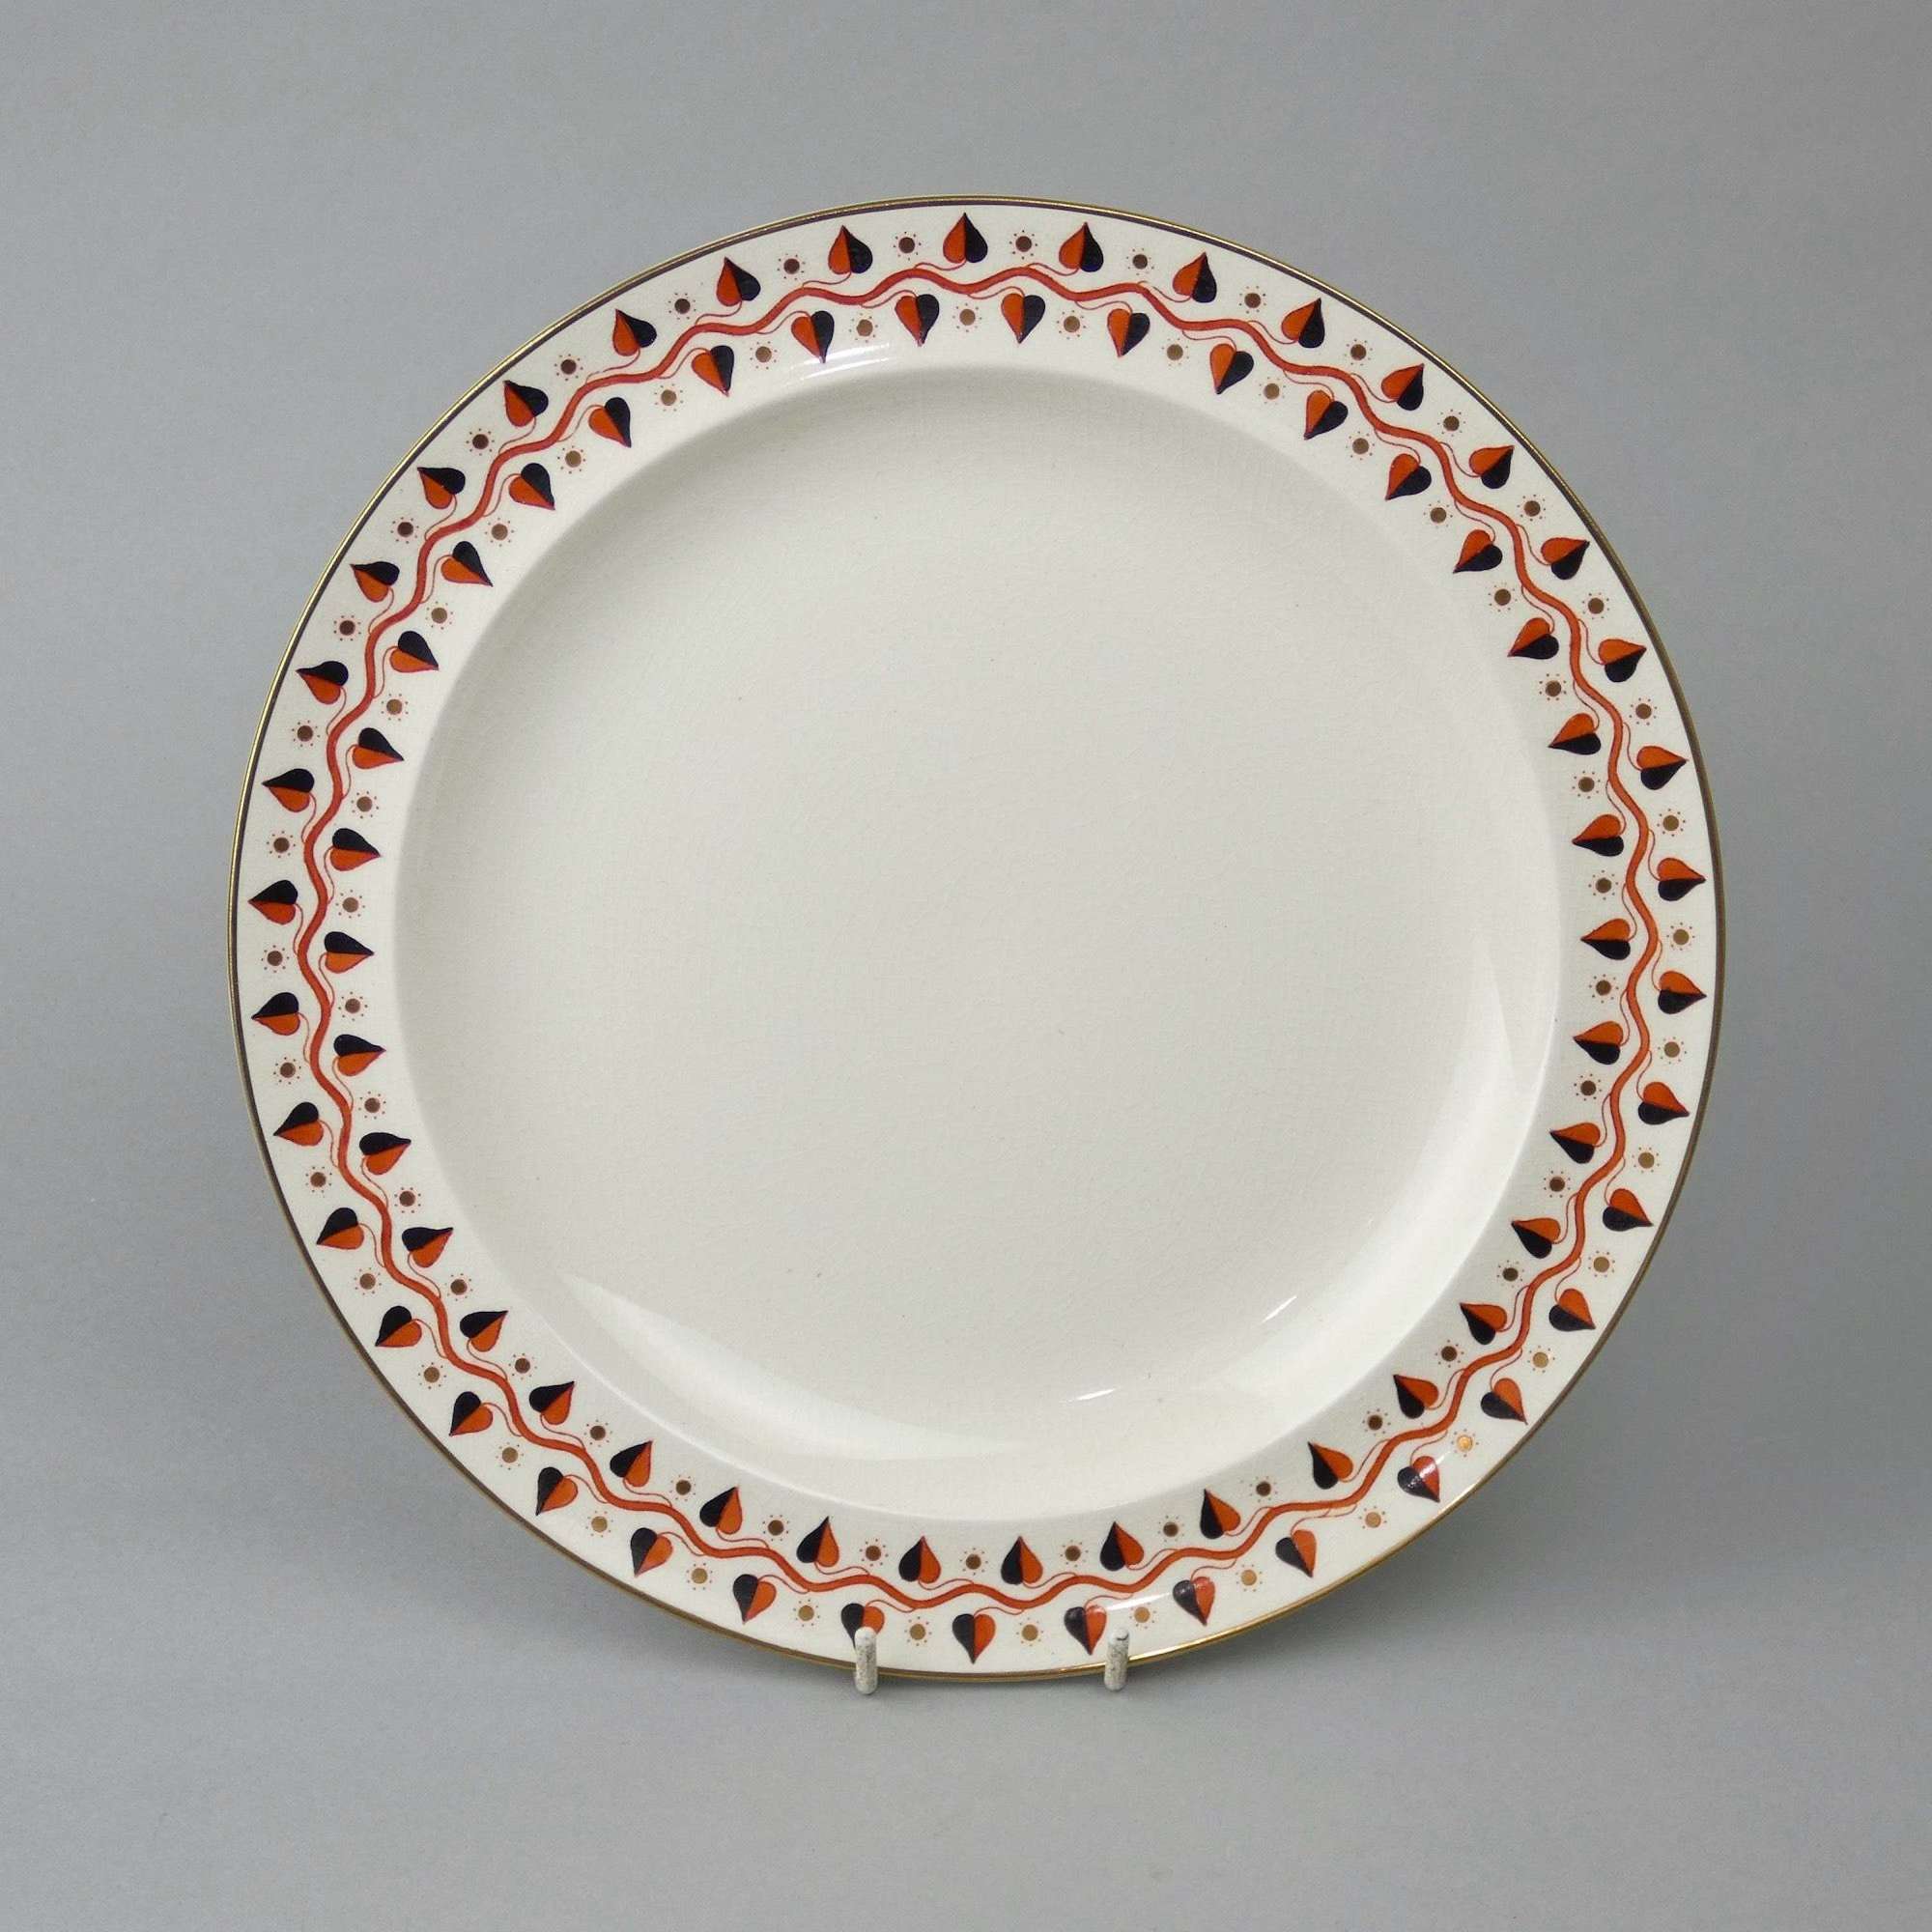 Wedgwood plate with painted and gilt border